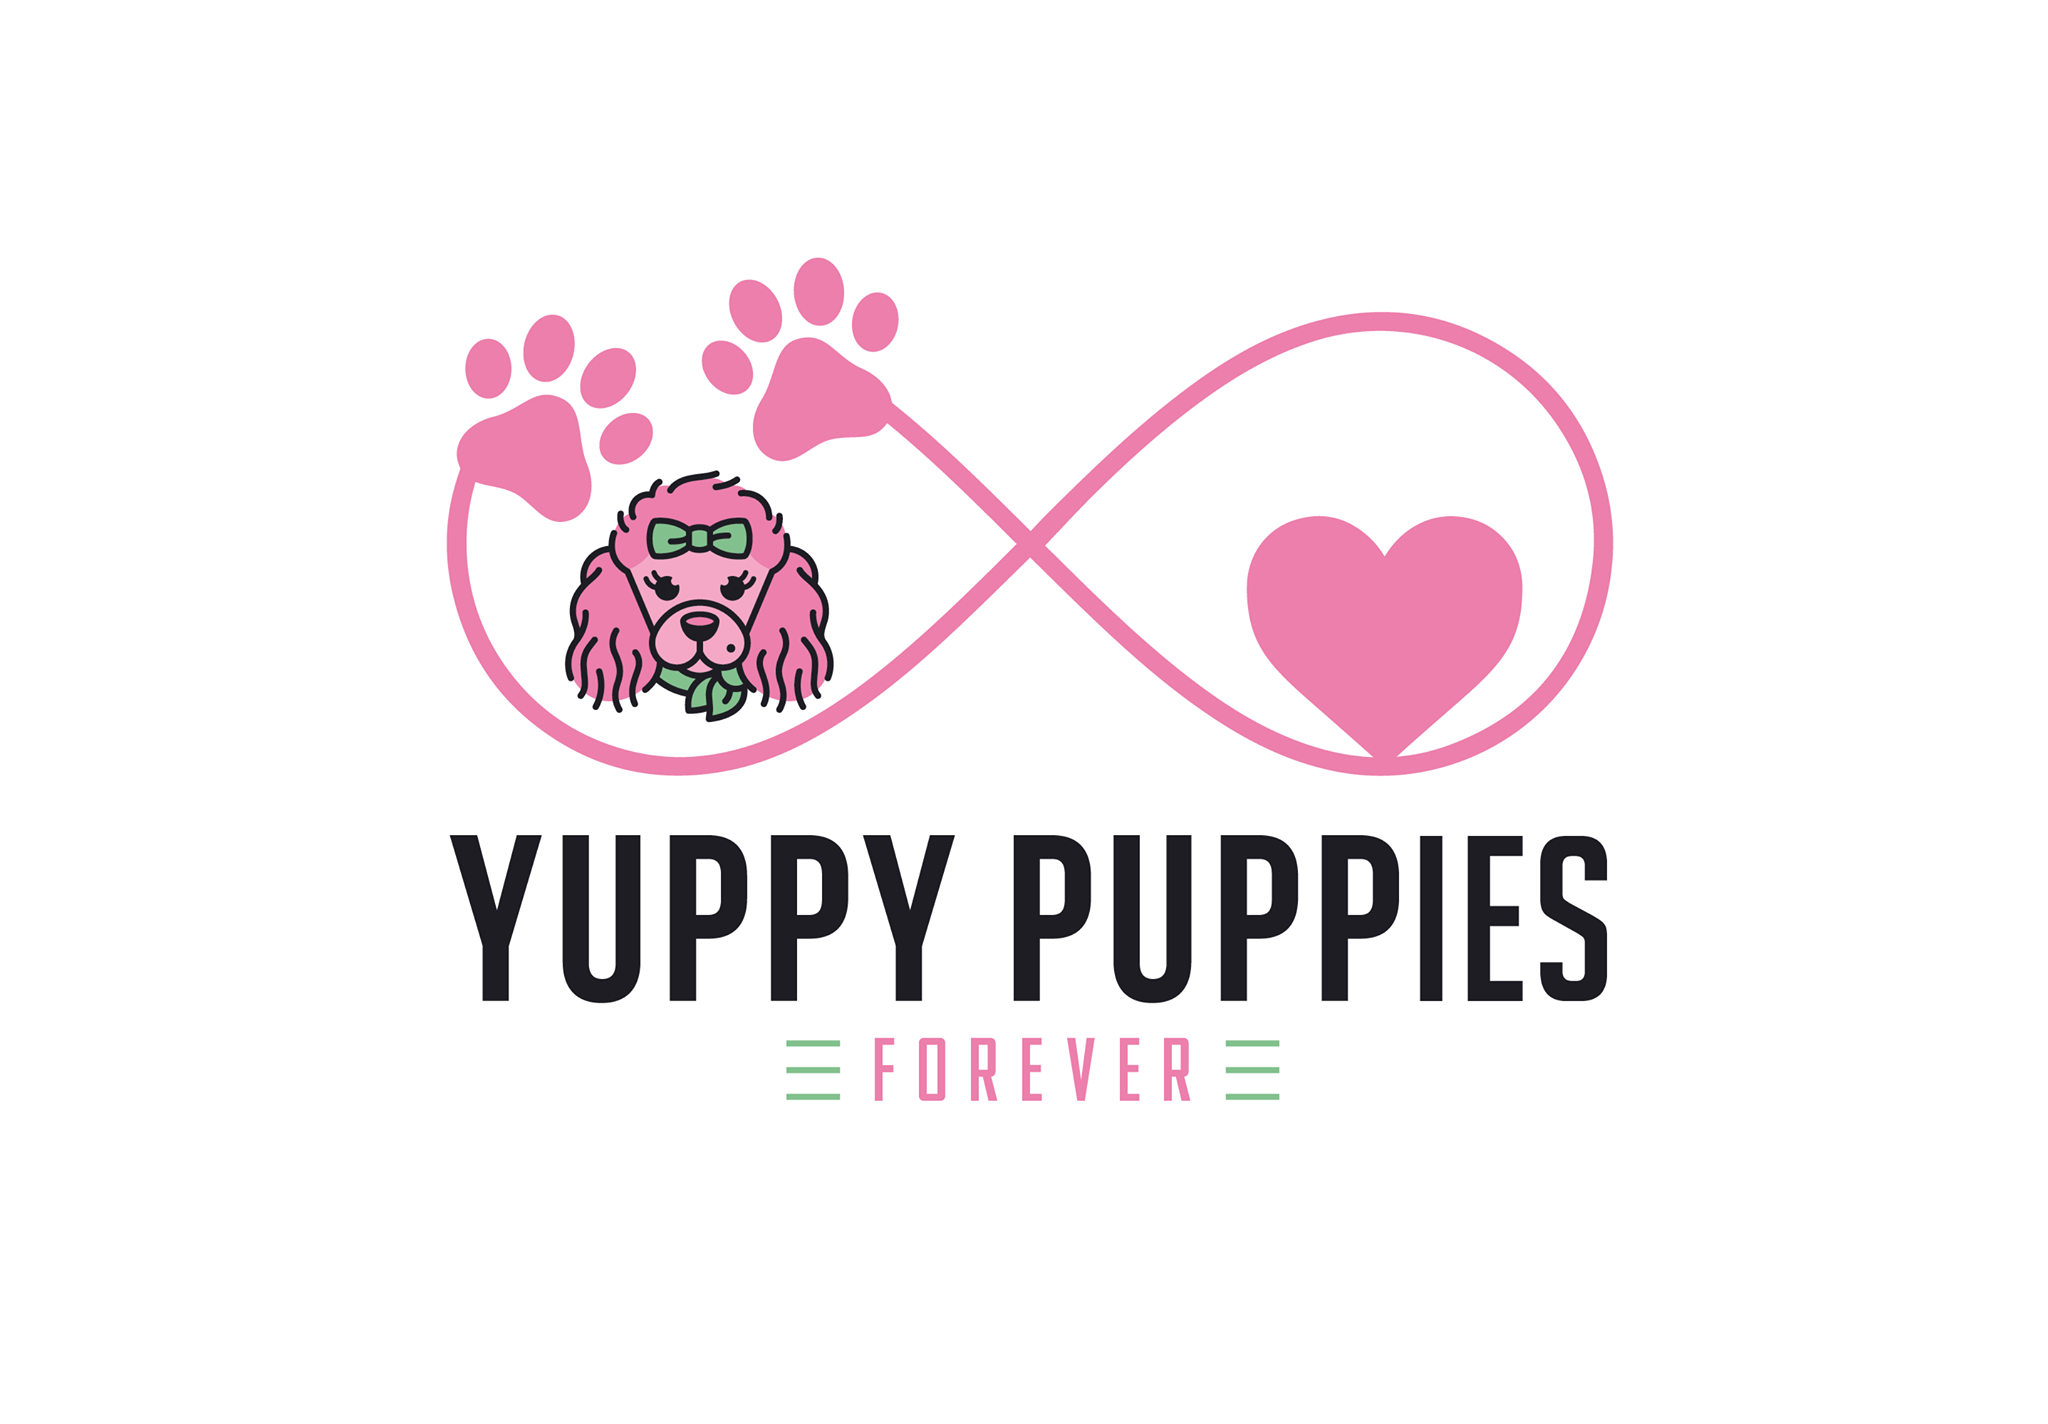 Yuppy Puppies Forever Inc.